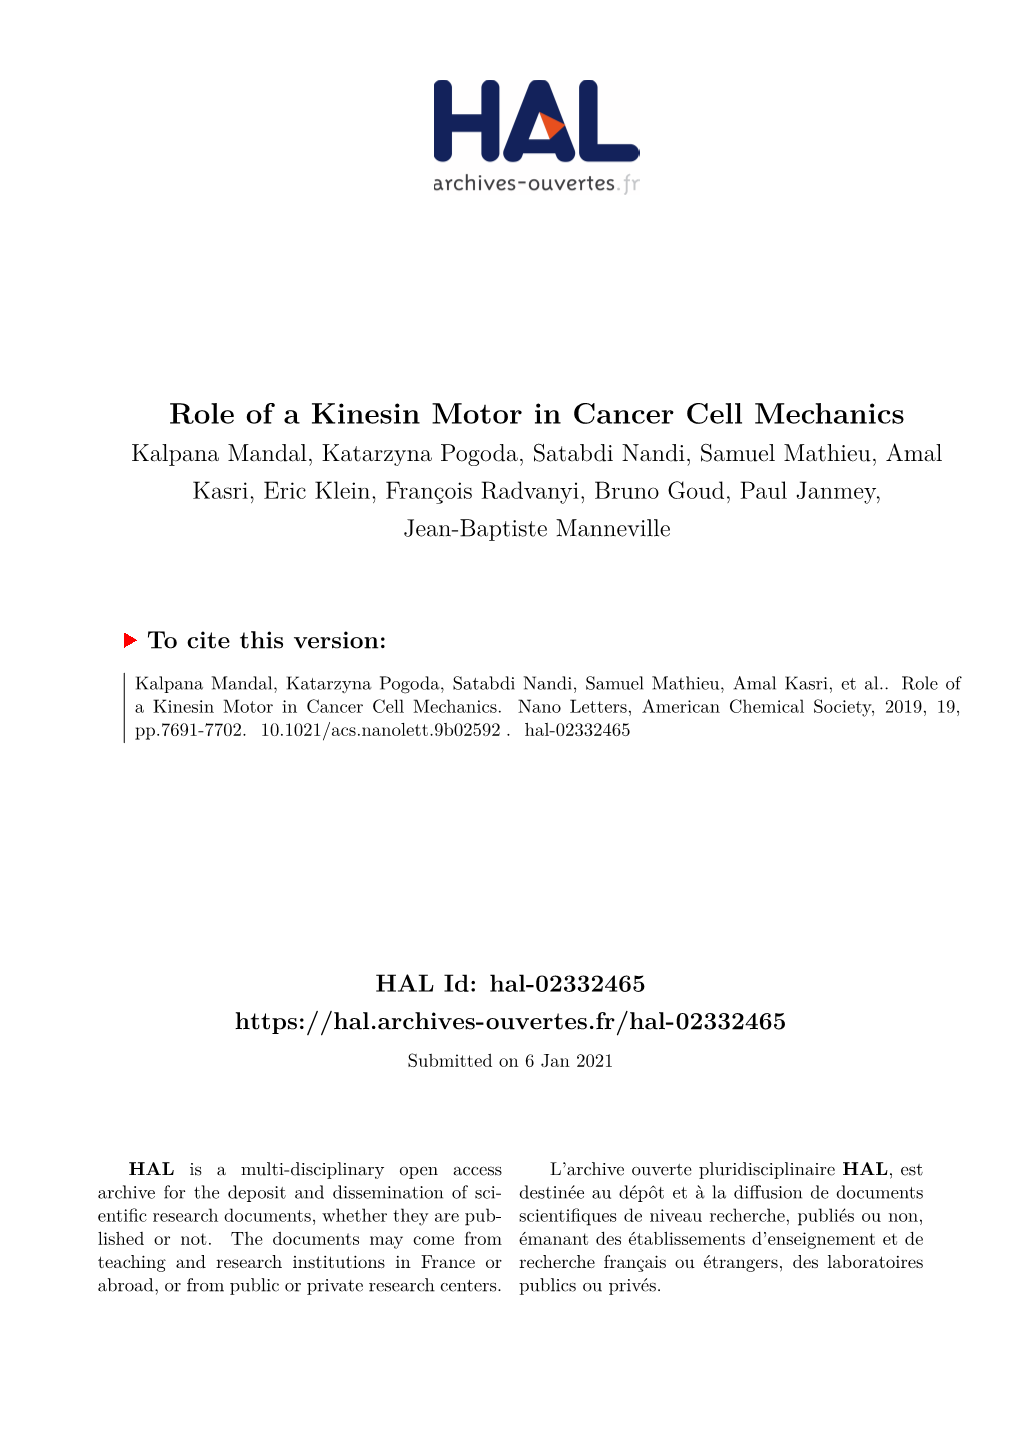 Role of a Kinesin Motor in Cancer Cell Mechanics